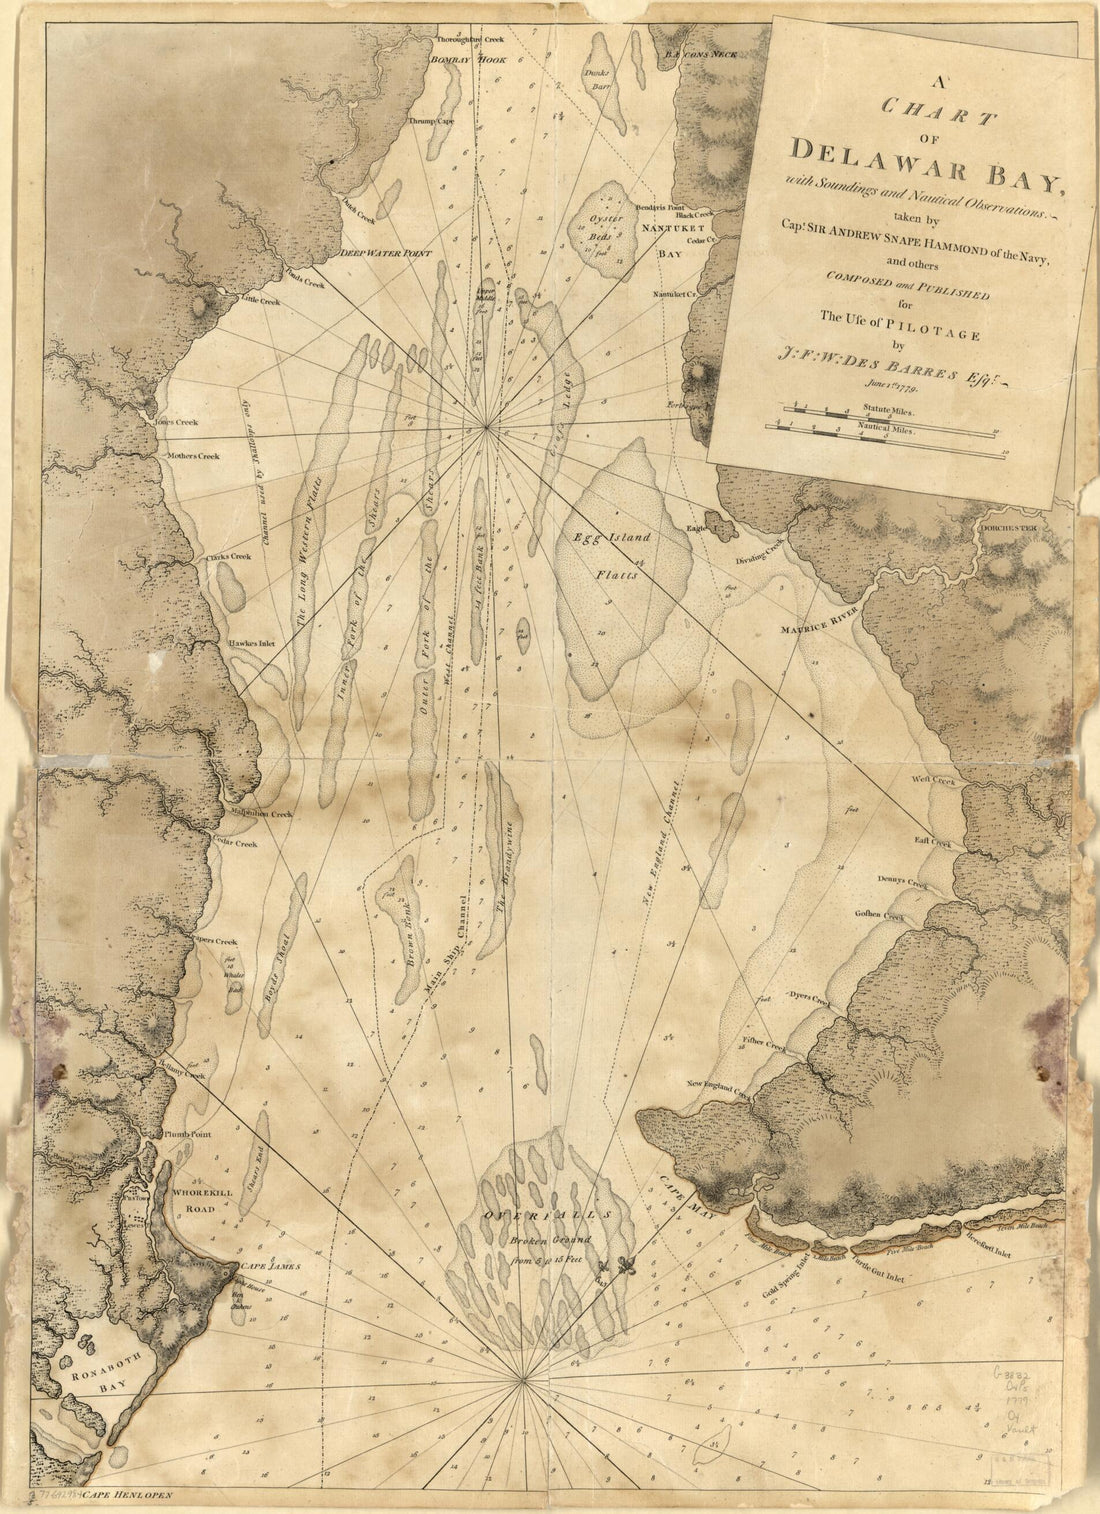 This old map of A Chart of Delawar Bay, With Soundings and Nautical Observations from 1779 was created by Joseph F. W. (Joseph Frederick Wallet) Des Barres, Andrew Snape Hamond in 1779